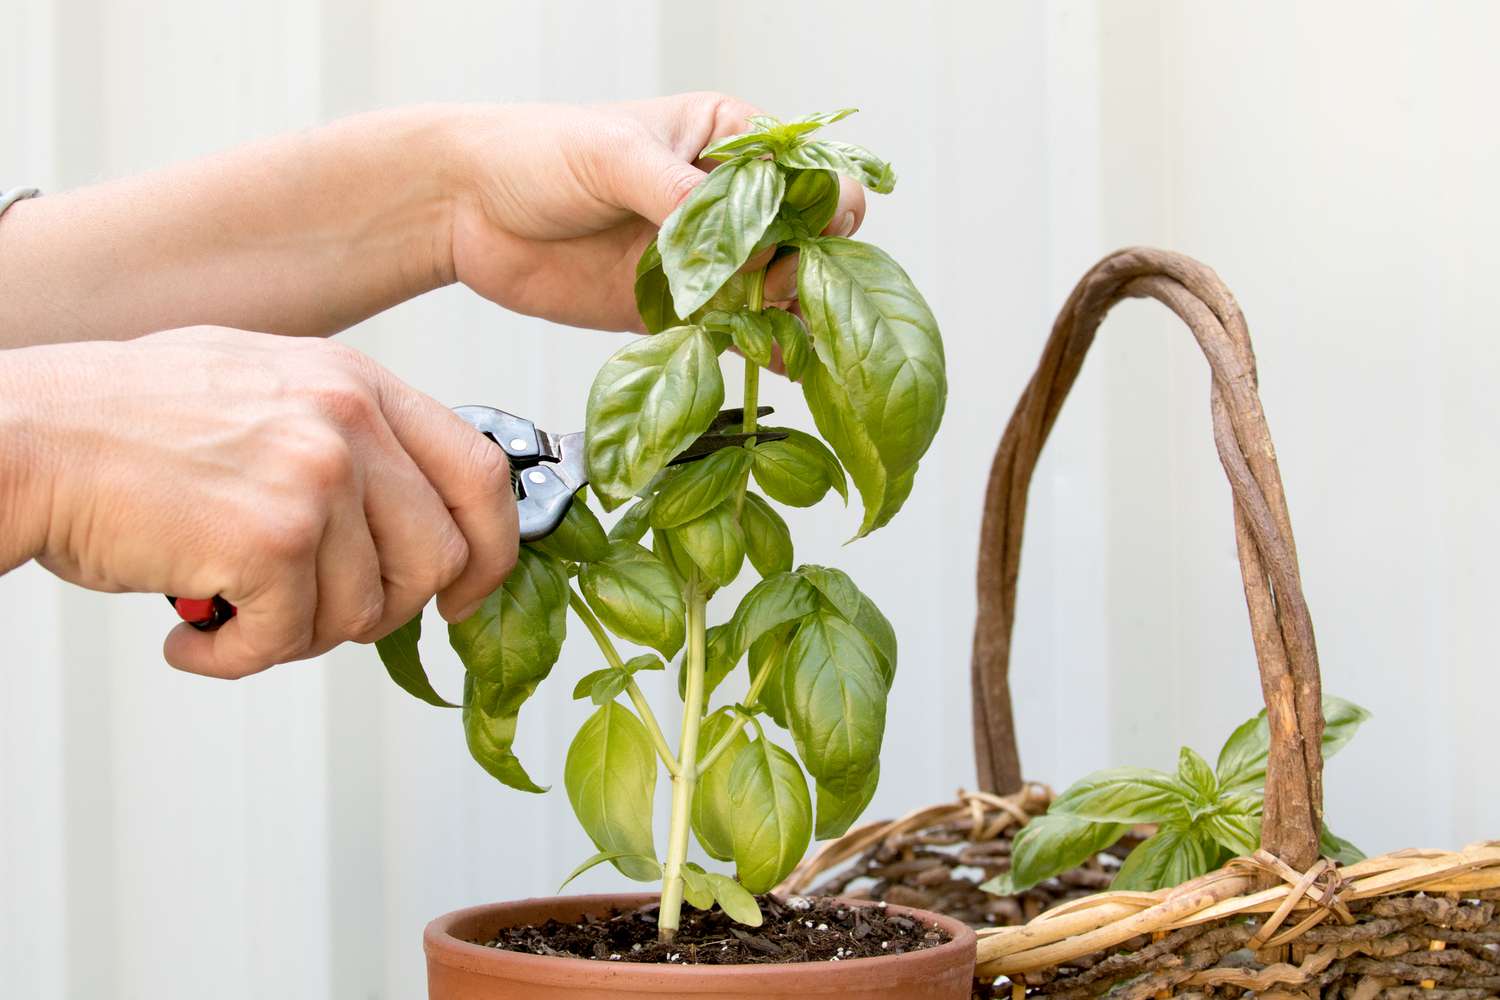 How To Pick Basil Leaves Without Killing Plant